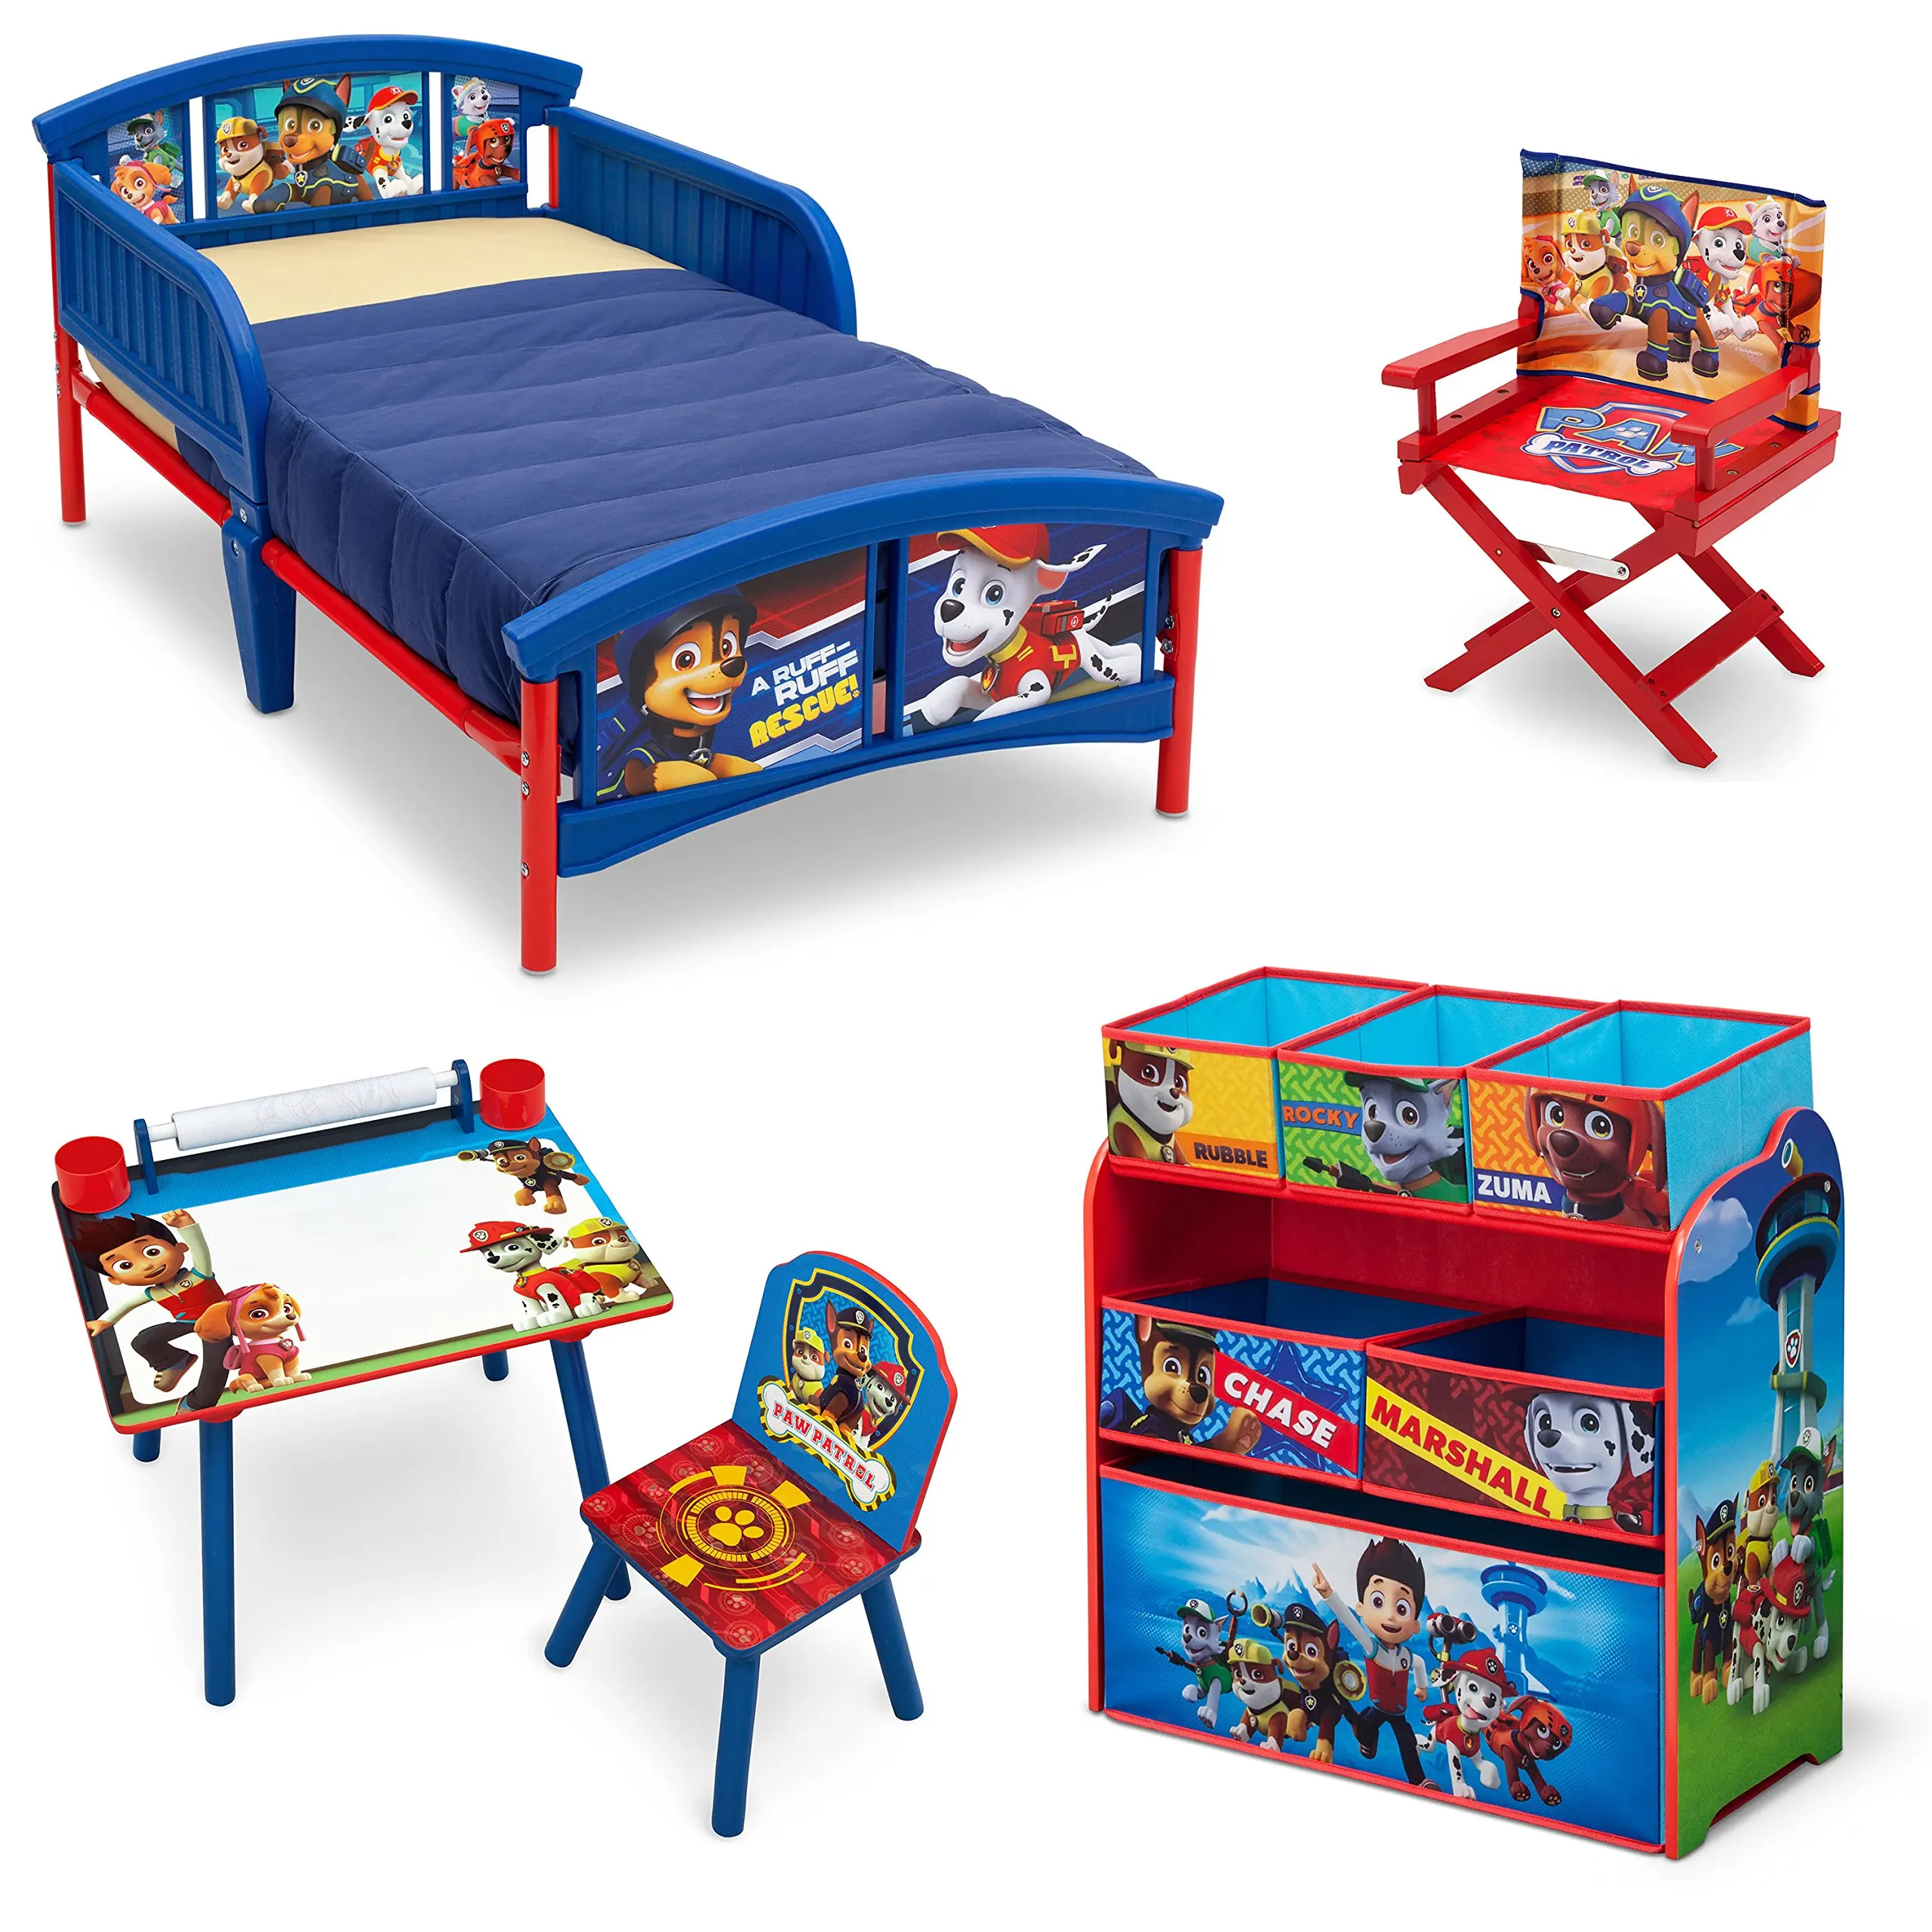 Buy Disney Planes Toddler Bed Room In A Box In Cheap Price